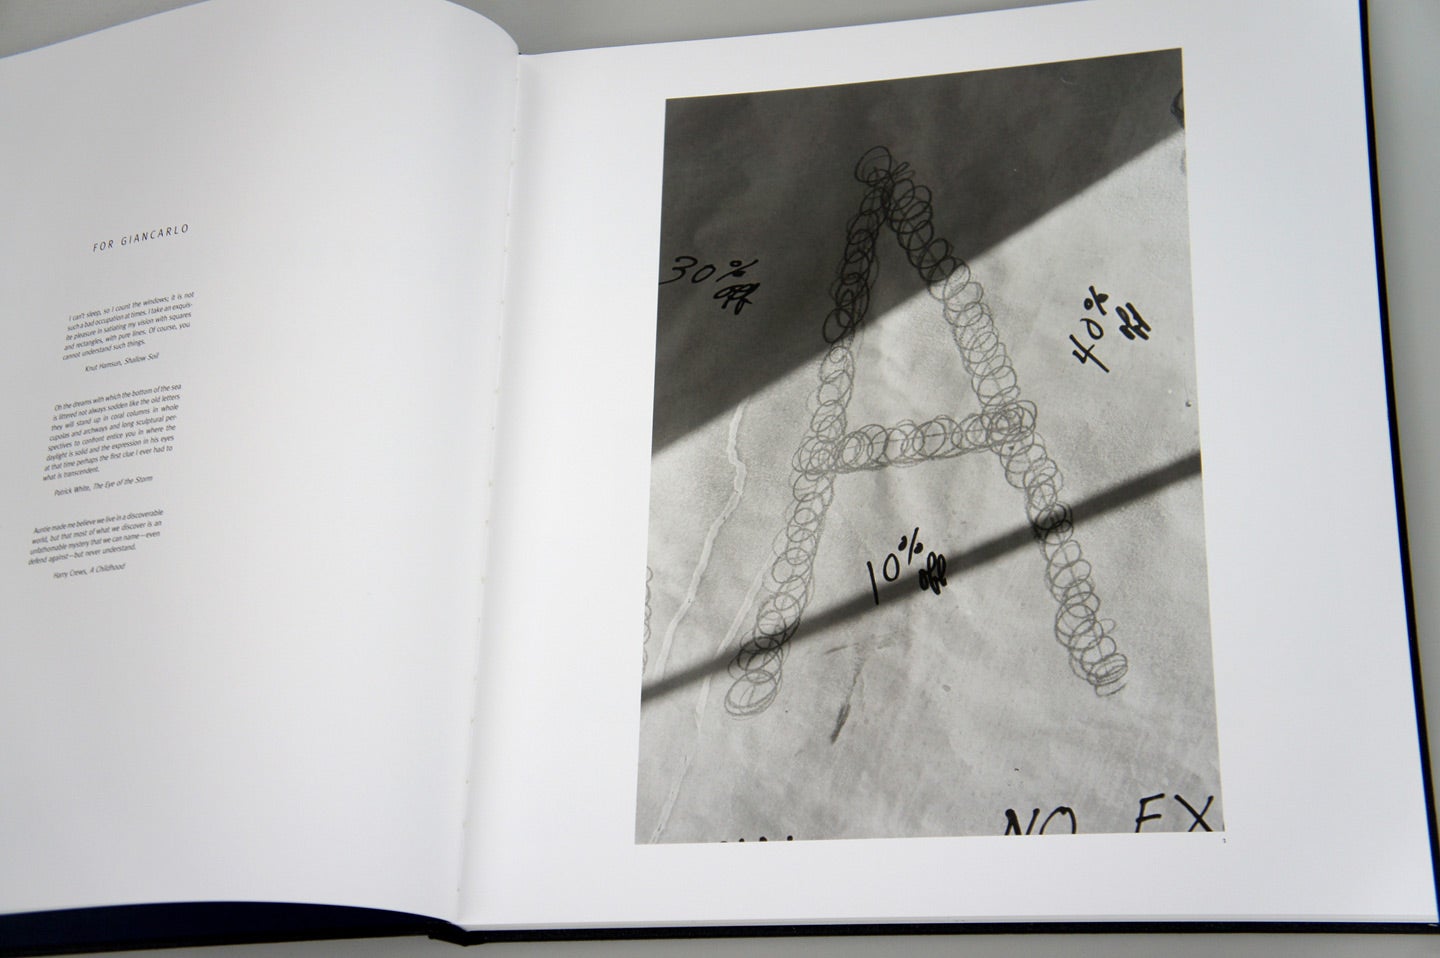 Lee Friedlander: Letters from the People (Special Limited Edition with One Vintage Gelatin Silver Print: "D")